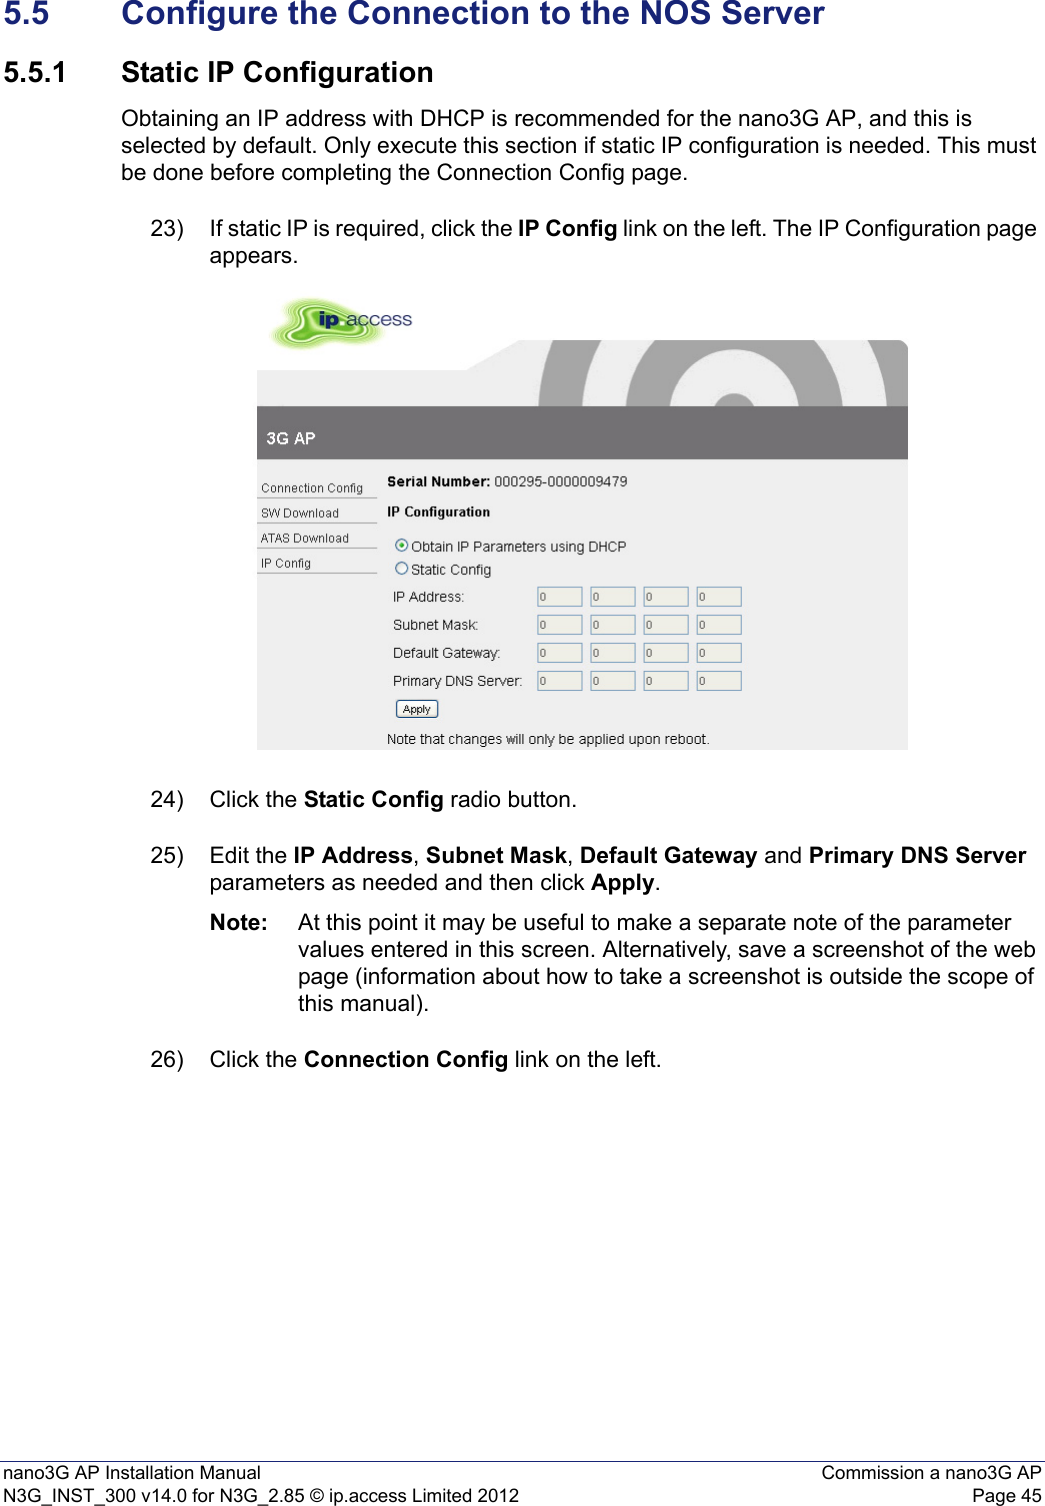 nano3G AP Installation Manual Commission a nano3G APN3G_INST_300 v14.0 for N3G_2.85 © ip.access Limited 2012 Page 455.5 Configure the Connection to the NOS Server5.5.1 Static IP ConfigurationObtaining an IP address with DHCP is recommended for the nano3G AP, and this is selected by default. Only execute this section if static IP configuration is needed. This must be done before completing the Connection Config page.23) If static IP is required, click the IP Config link on the left. The IP Configuration page appears.24) Click the Static Config radio button.25) Edit the IP Address, Subnet Mask, Default Gateway and Primary DNS Server parameters as needed and then click Apply.Note: At this point it may be useful to make a separate note of the parameter values entered in this screen. Alternatively, save a screenshot of the web page (information about how to take a screenshot is outside the scope of this manual).26) Click the Connection Config link on the left.